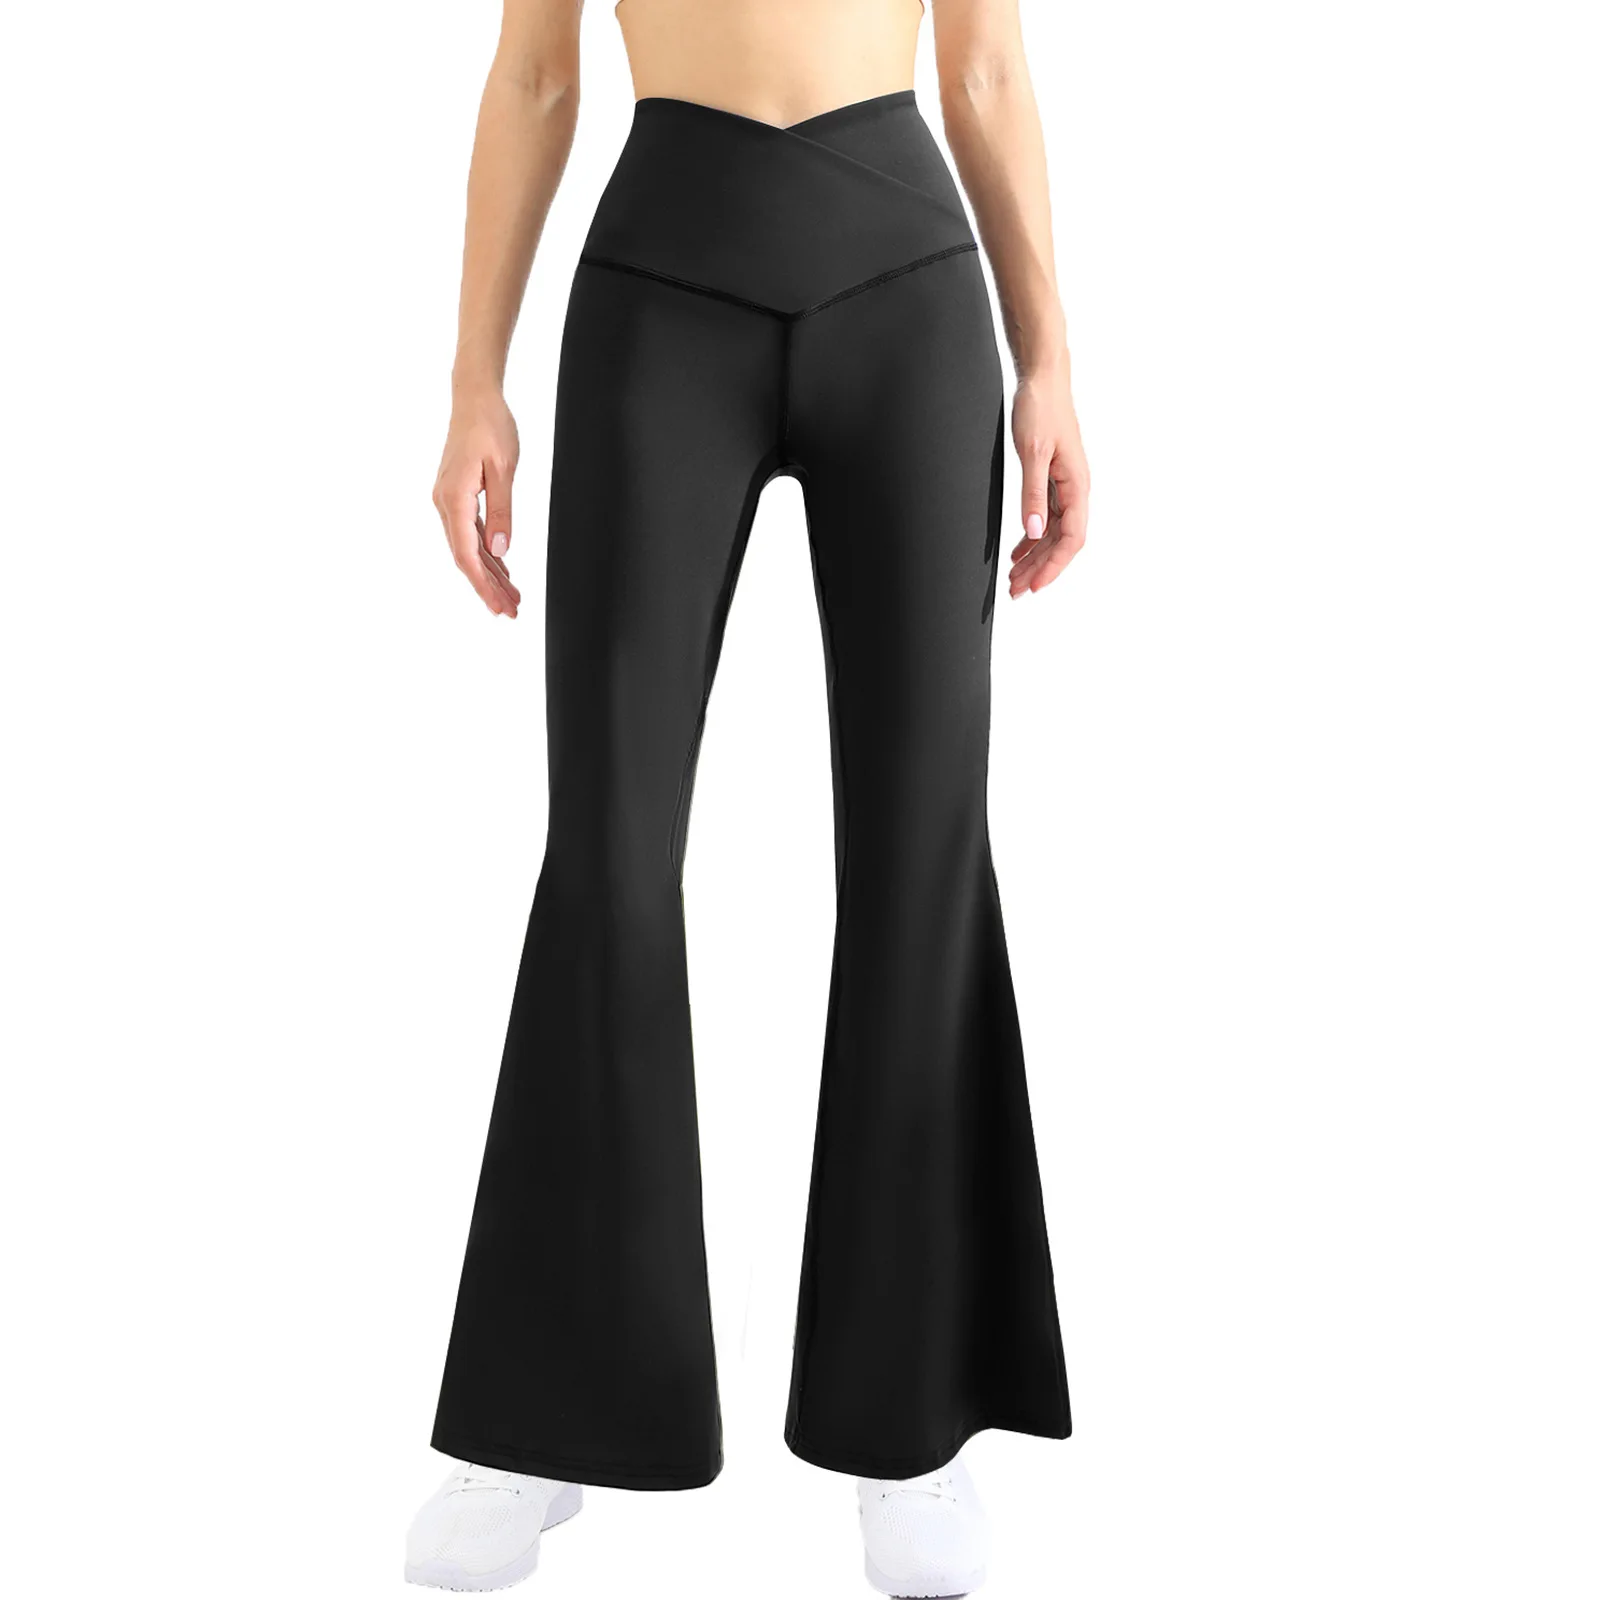 Womens Crossover Flare Leggings, High Waisted Yoga Sports Pants